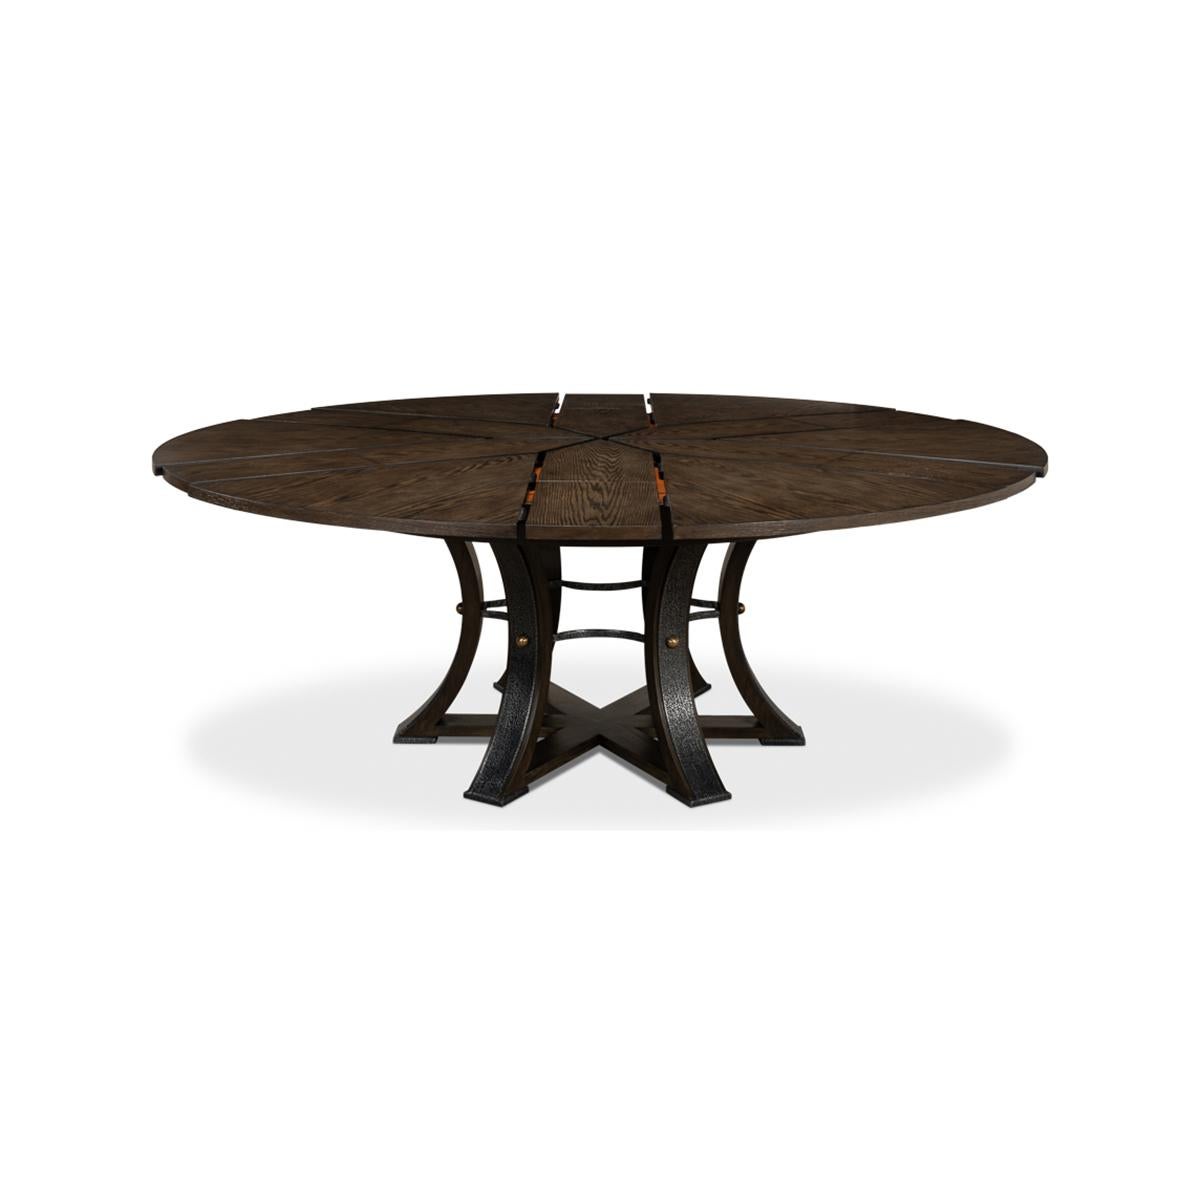 Contemporary Large Modern Industrial Dining Table - 84 For Sale